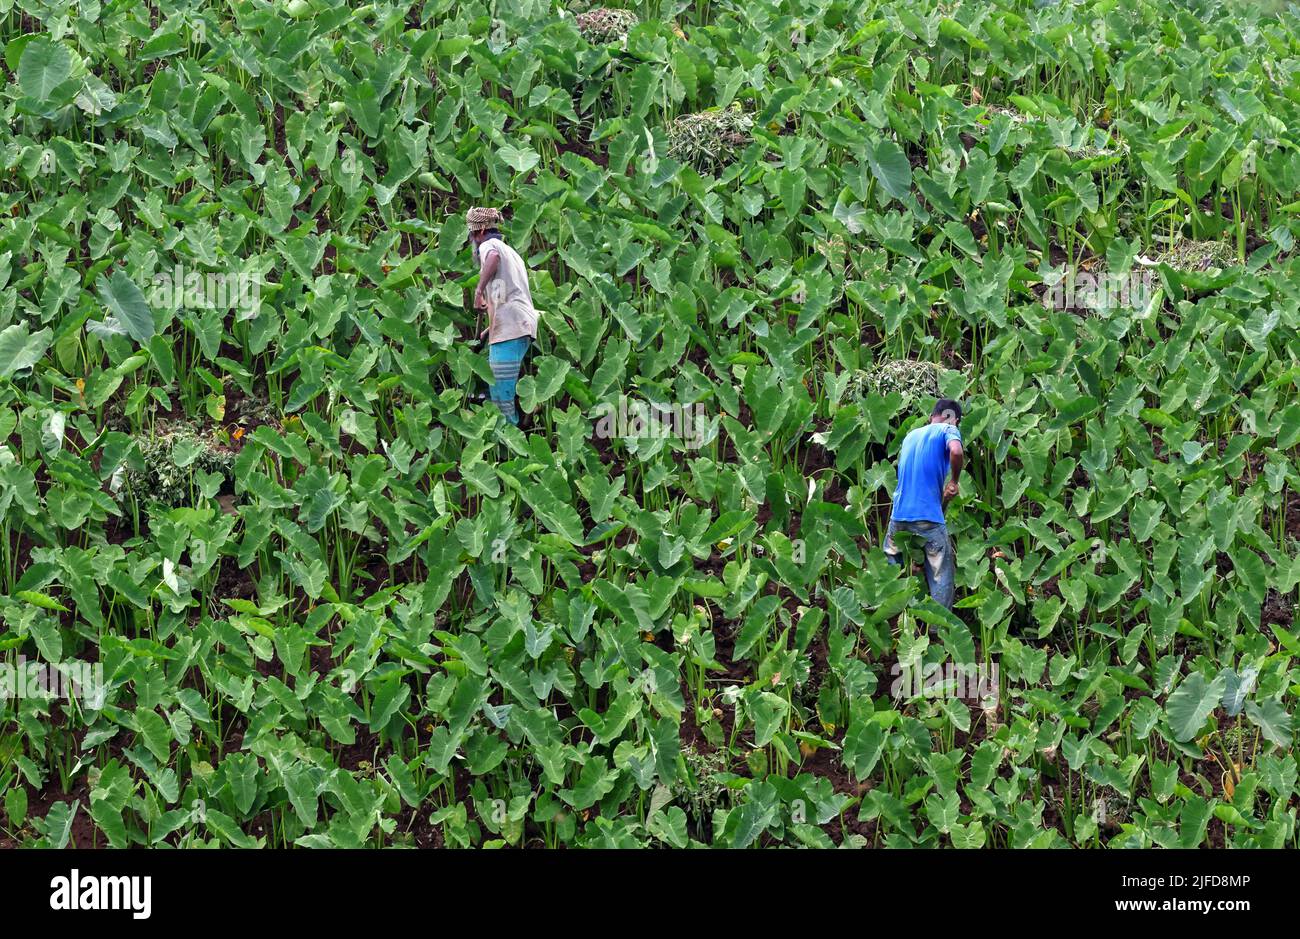 Farmers are working in the jhum Cultivation.this photo was taken from Khagrachari,Chittagong, Bangladesh. Stock Photo